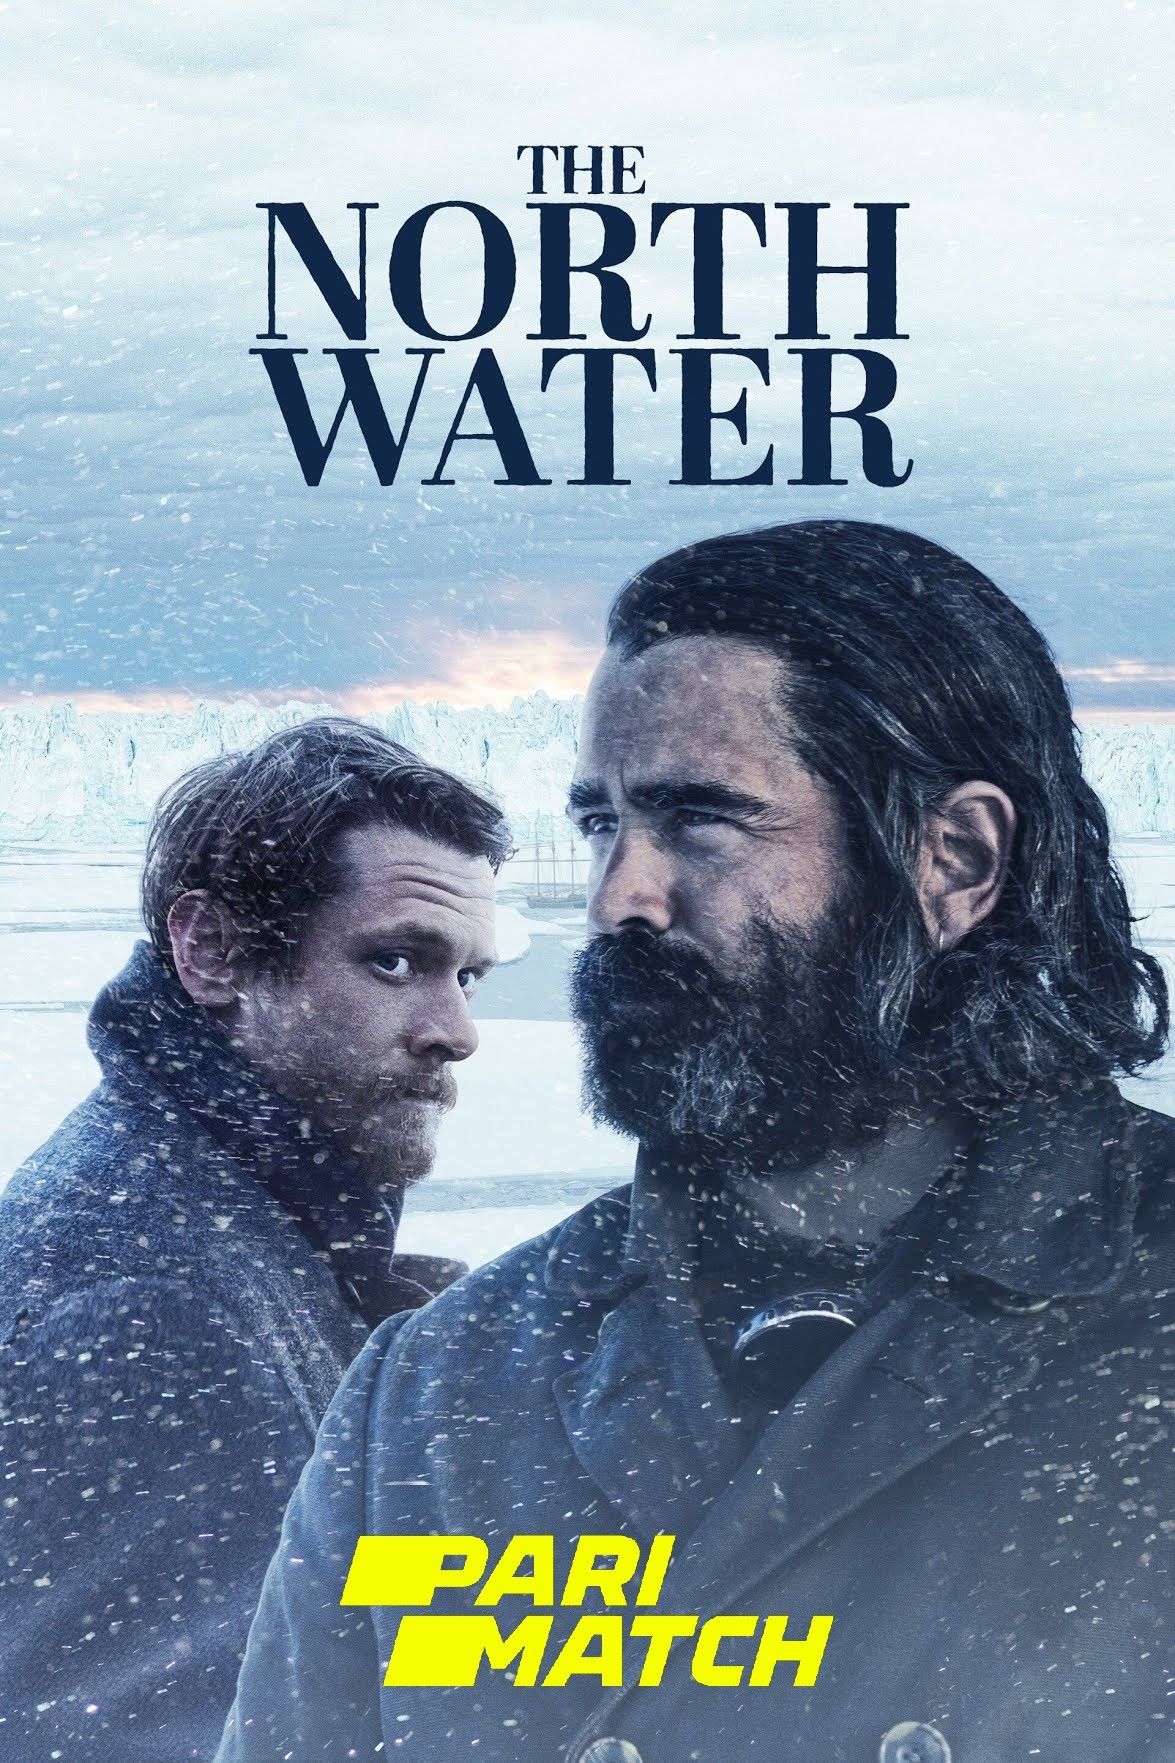 The North Water: Season 1 (2021) (Episode 1) Hindi (Voice Over) Dubbed TV Series download full movie